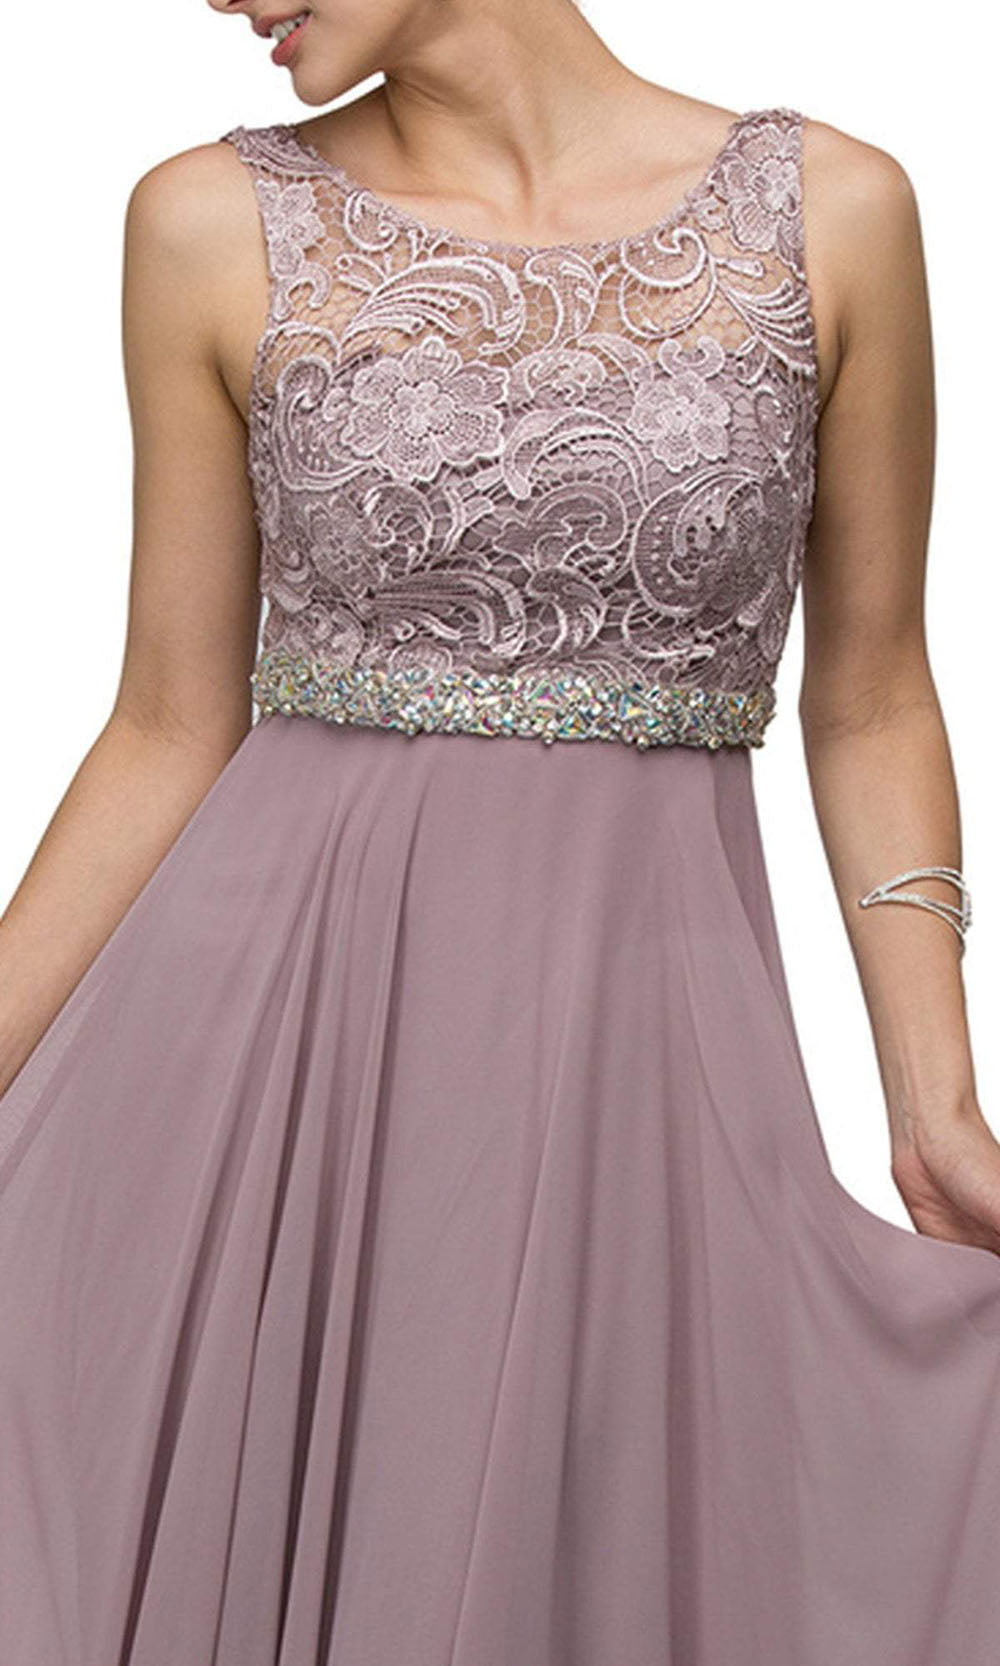 Dancing Queen - 9325 Embroidered Lace Scoop Neck Chiffon Prom Dress Special Occasion Dress